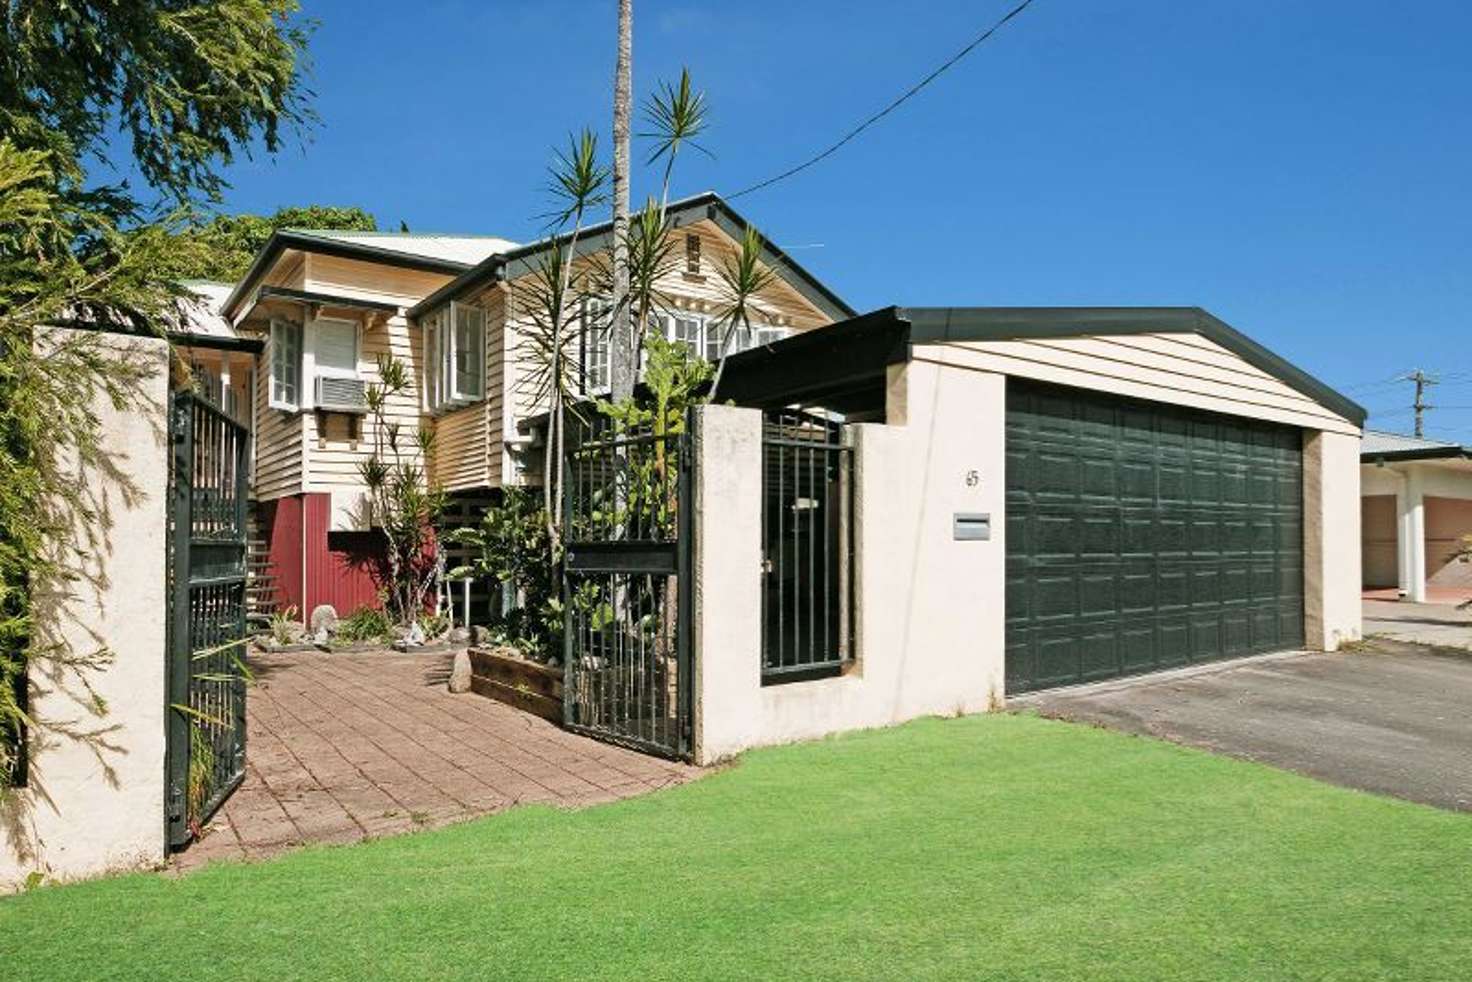 Main view of Homely house listing, 65 Scott St, Bungalow QLD 4870